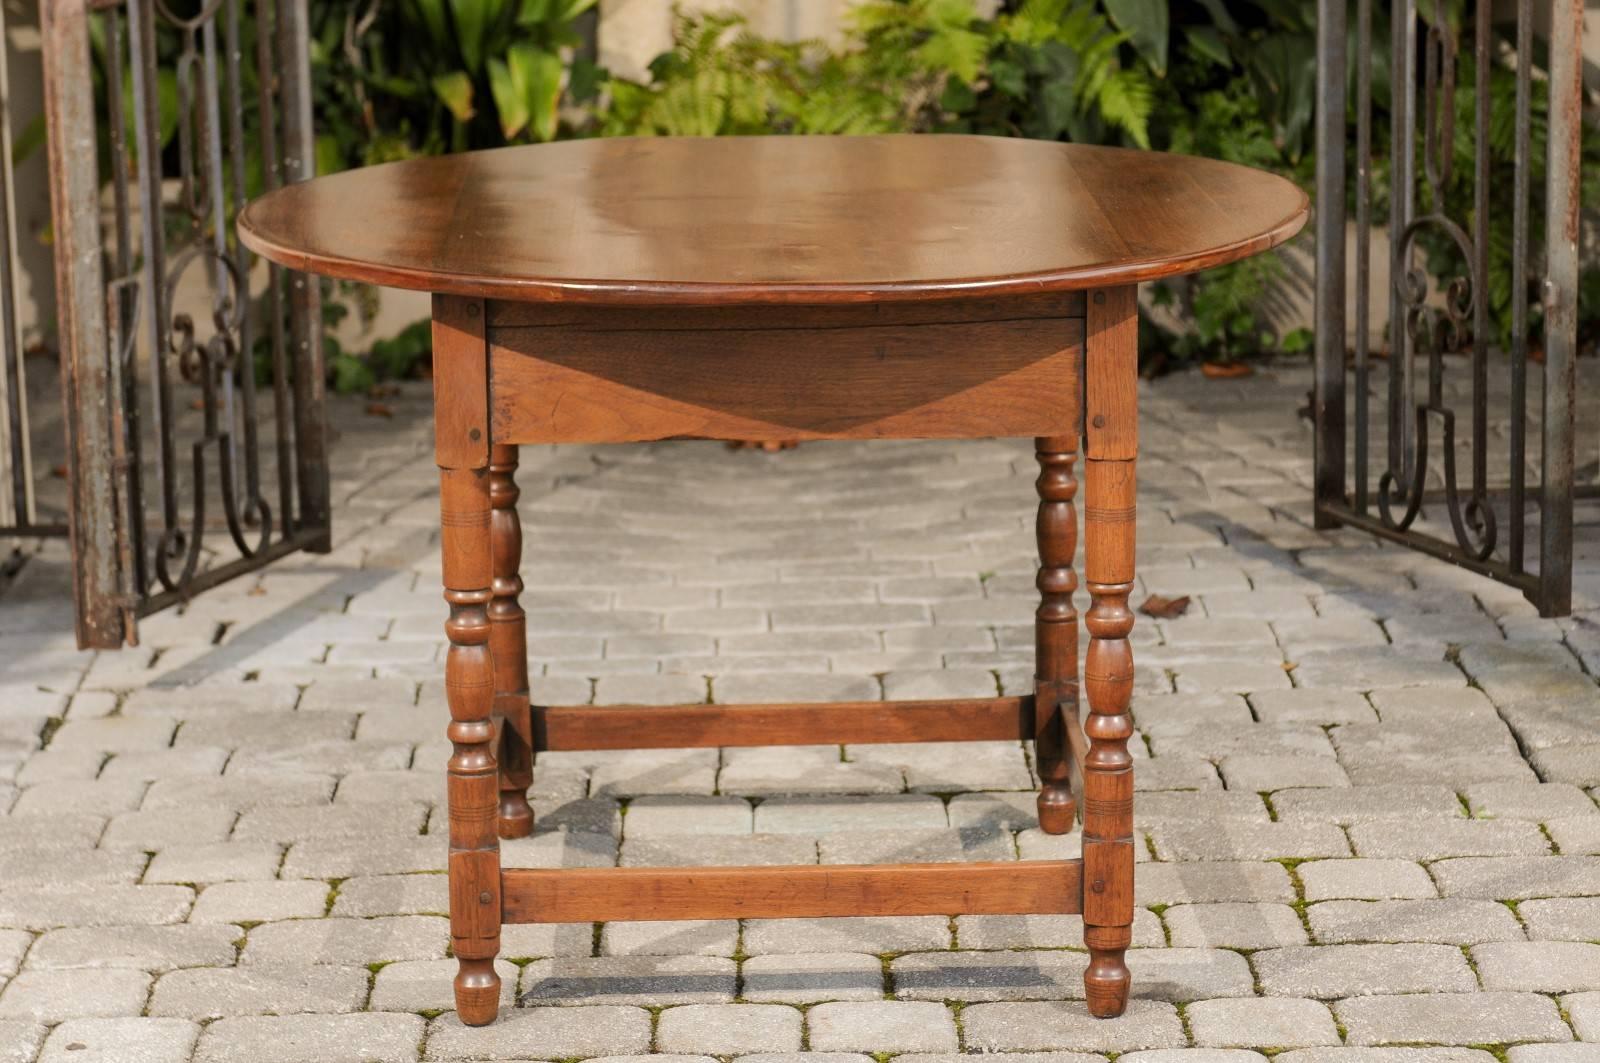 A French round walnut centre table with turned legs and stretcher from the late 19th century. Born in the 1880s, this French walnut table features a circular top supported by a simple square-shaped apron. Four elegant turned legs supporting the